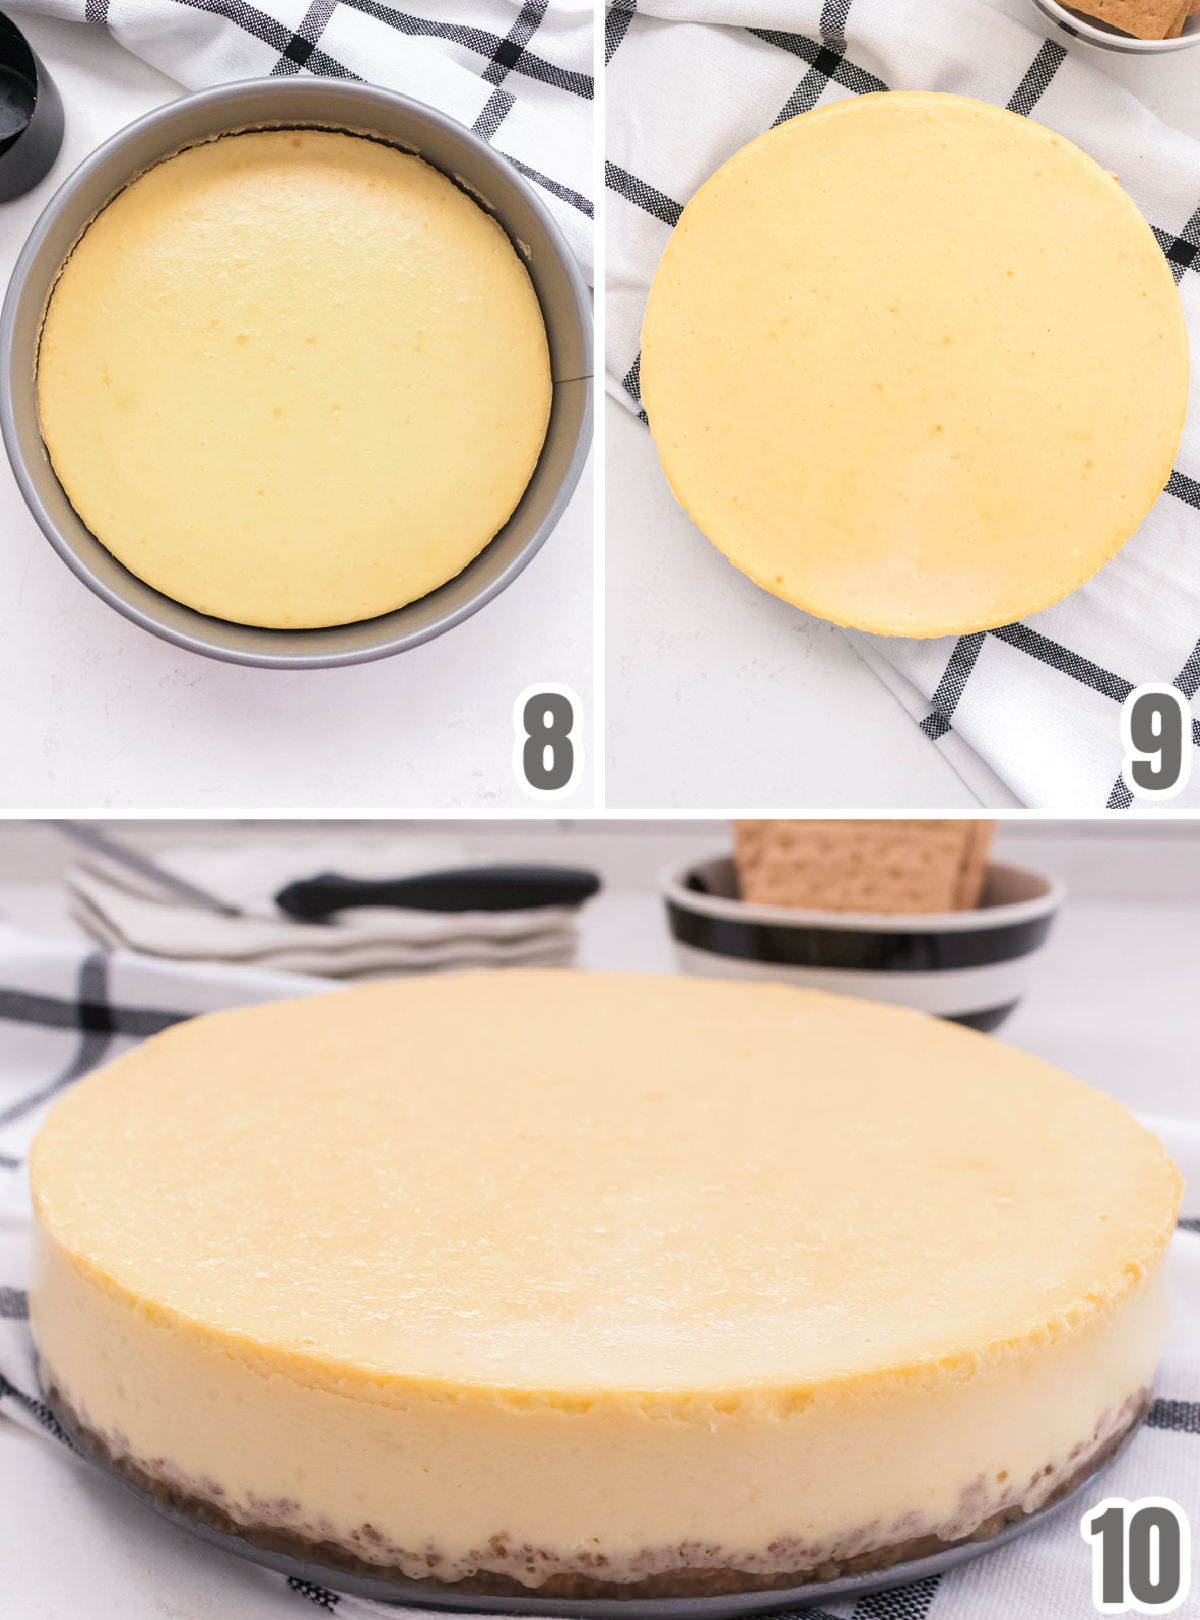 Collage image showing the steps for baking a Classic Cheesecake recipe.